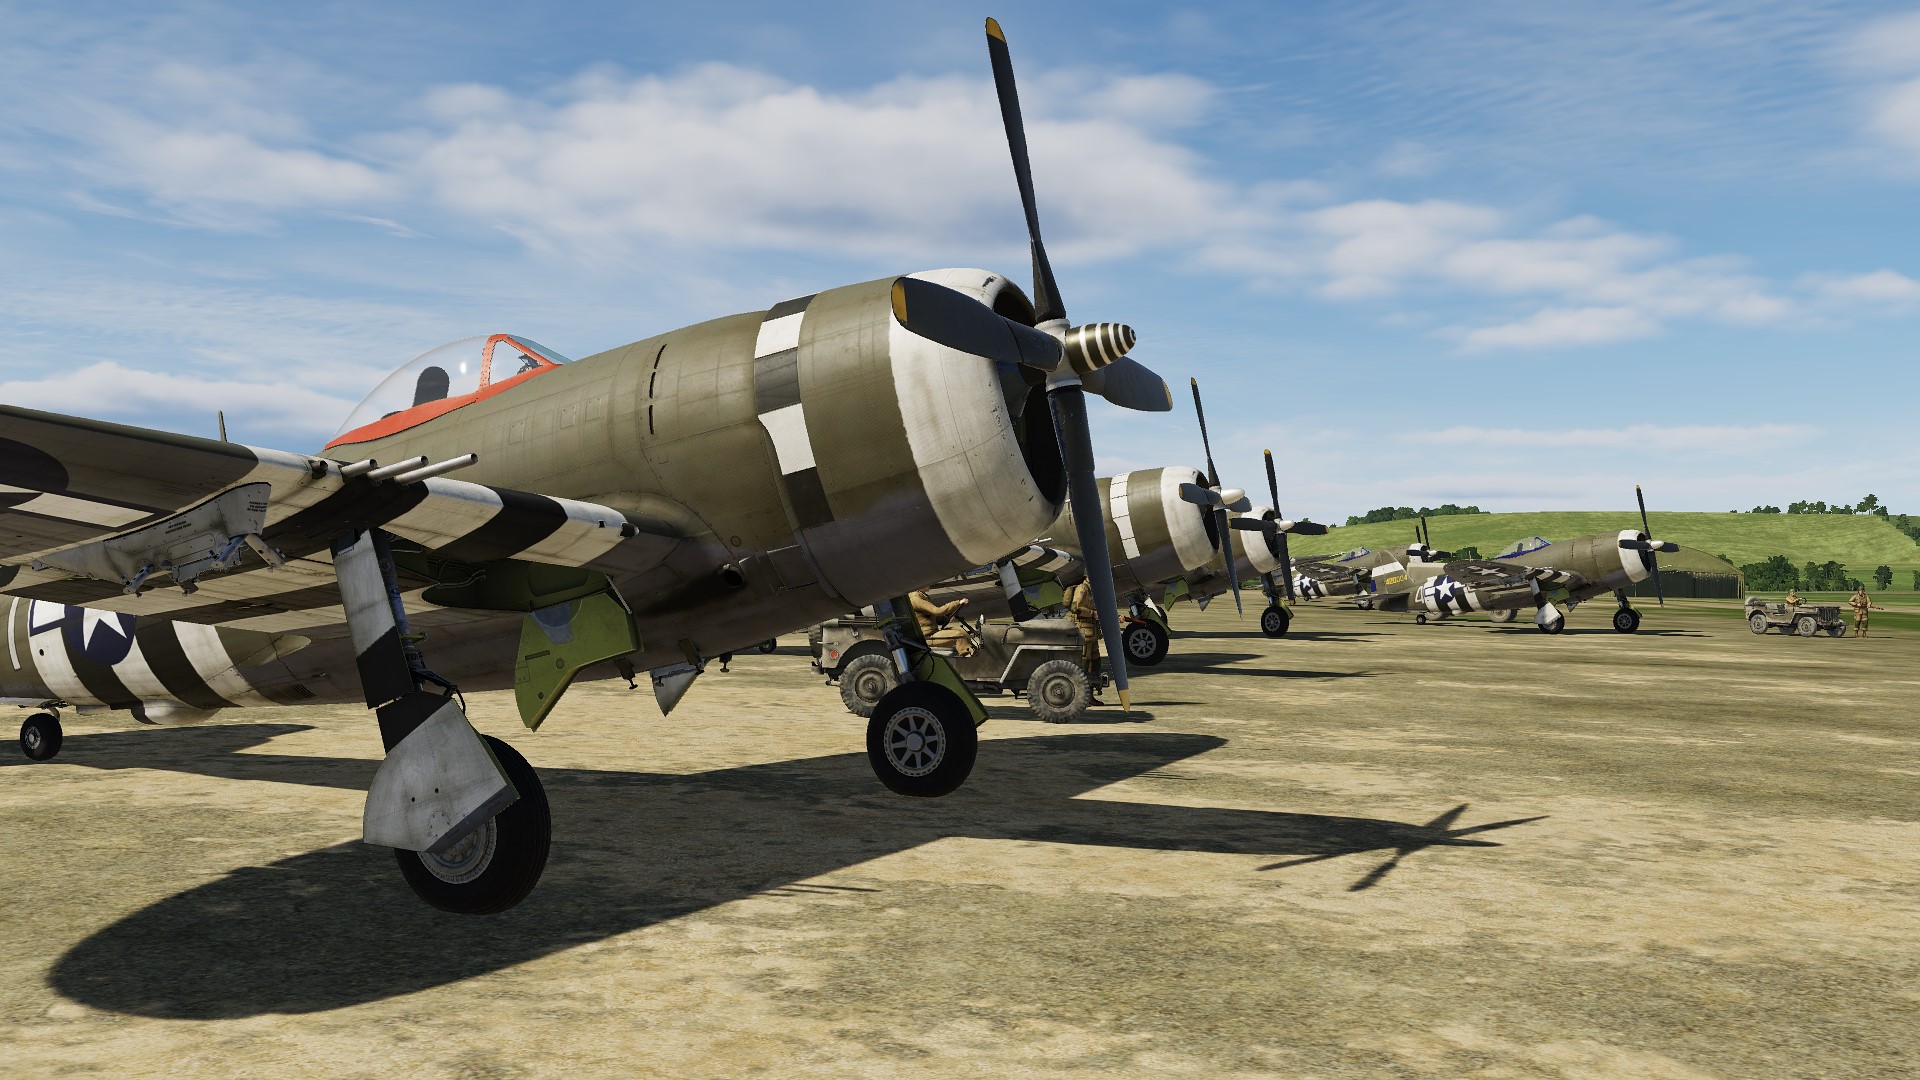 368th Fighter Group skin pack June 1944